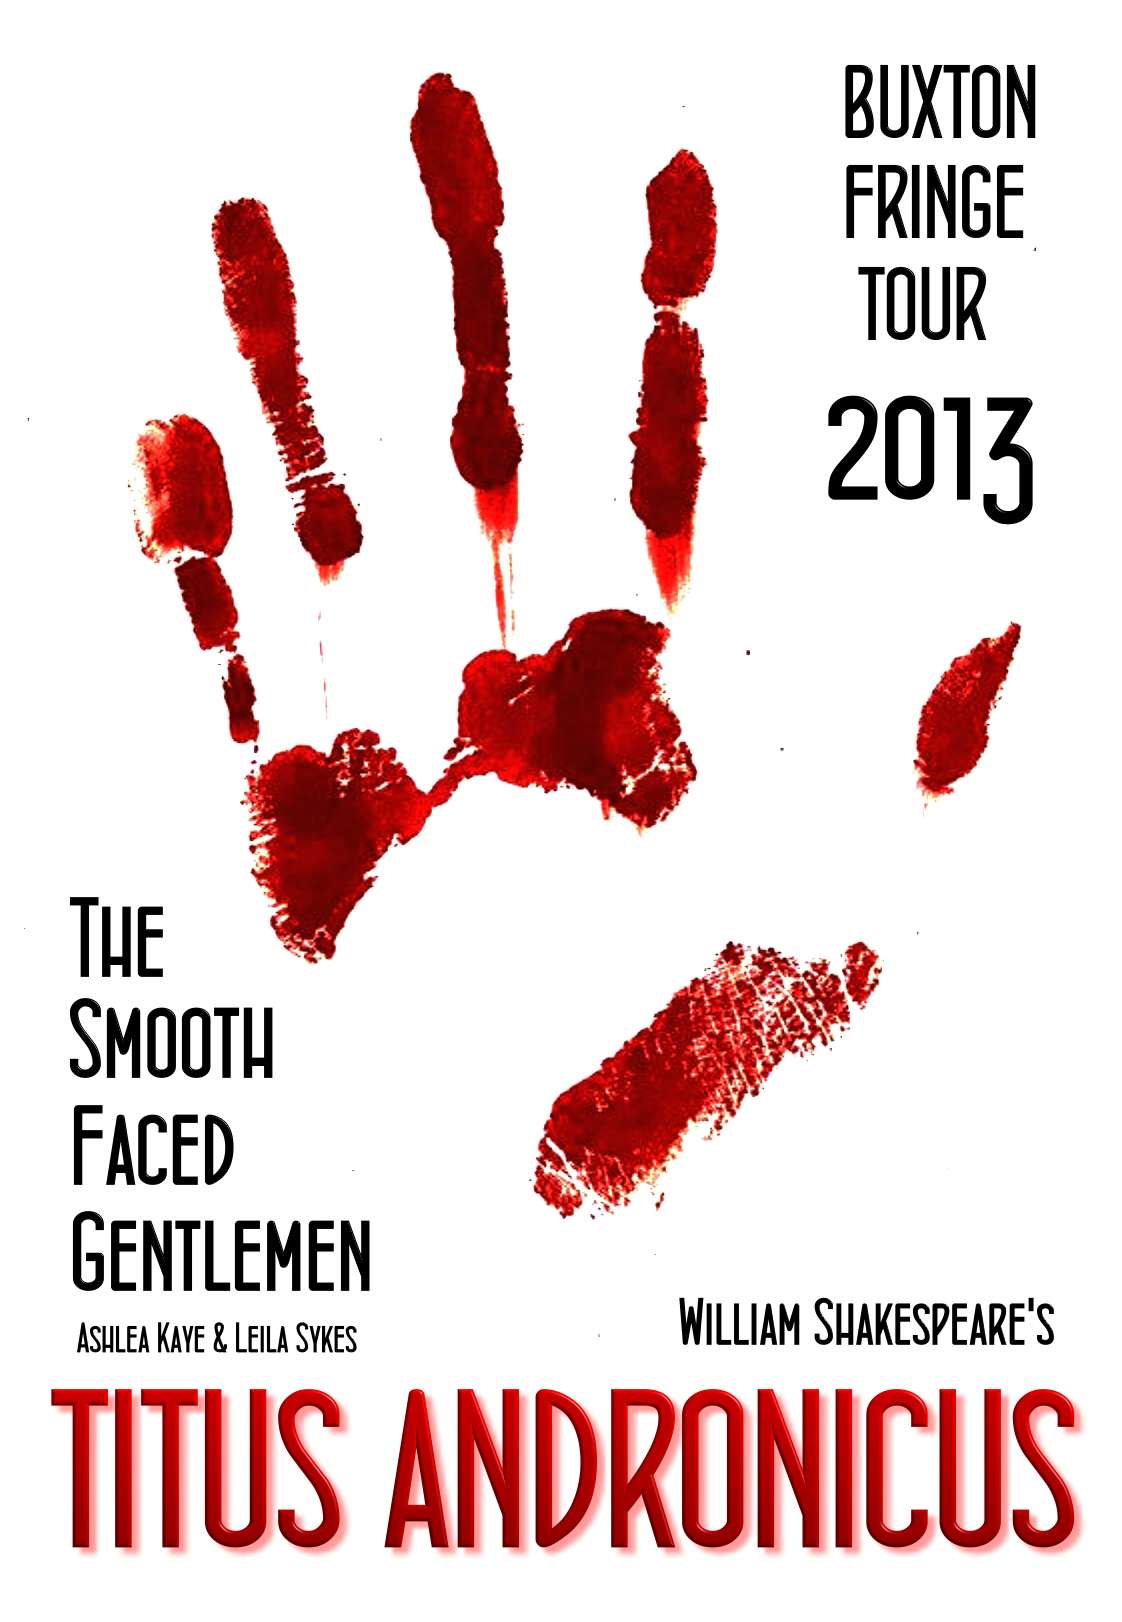 Titus Andronicus 2013 UK tour, The Buxton Fringe, Smooth Faced Gentlemen